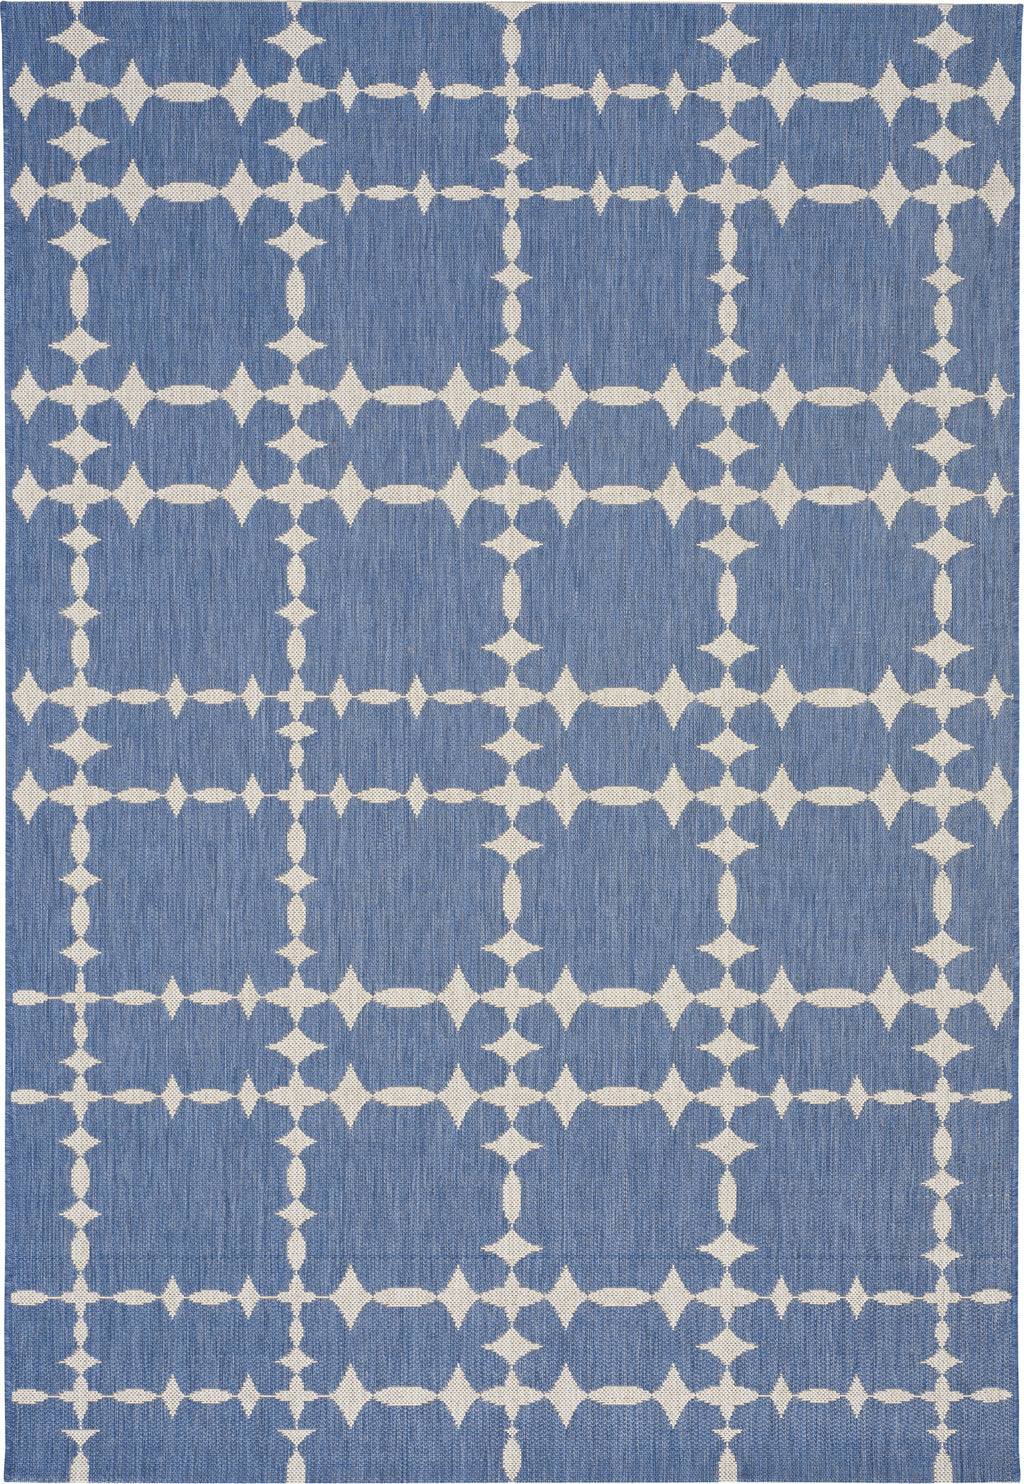 Capel COCOCOZY Elsinore-Tower Court 4738 Blueberry Area Rug main image